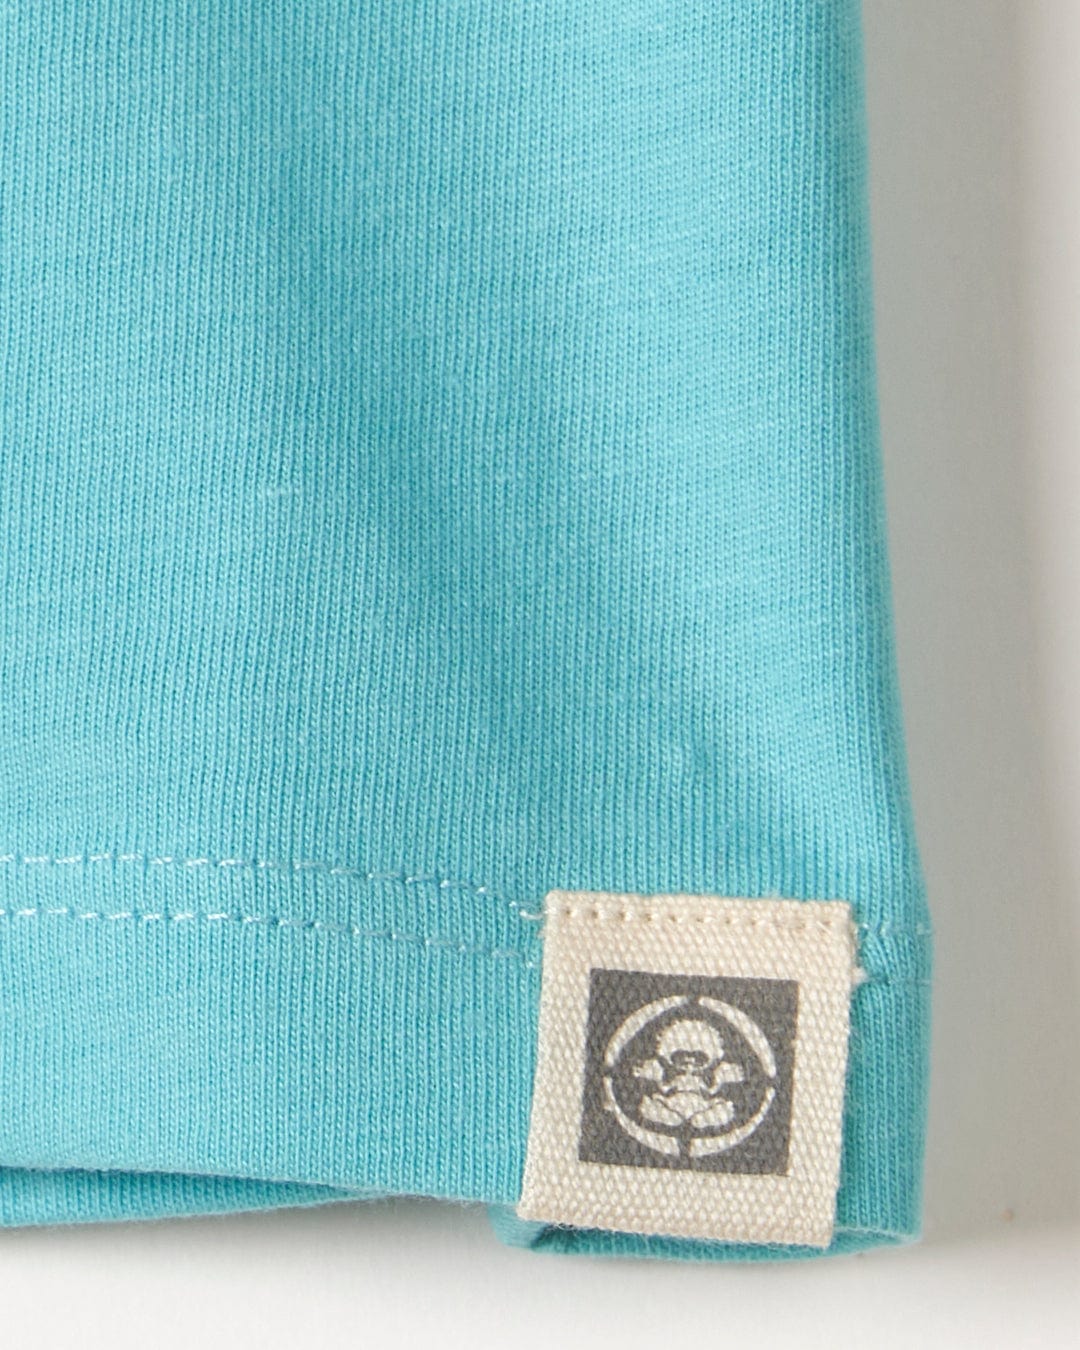 Close-up of a teal Tok Corp Recycled Kids Short Sleeve T-Shirt fabric with a small white label featuring a circular Saltrock branding logo, attached to the hem.